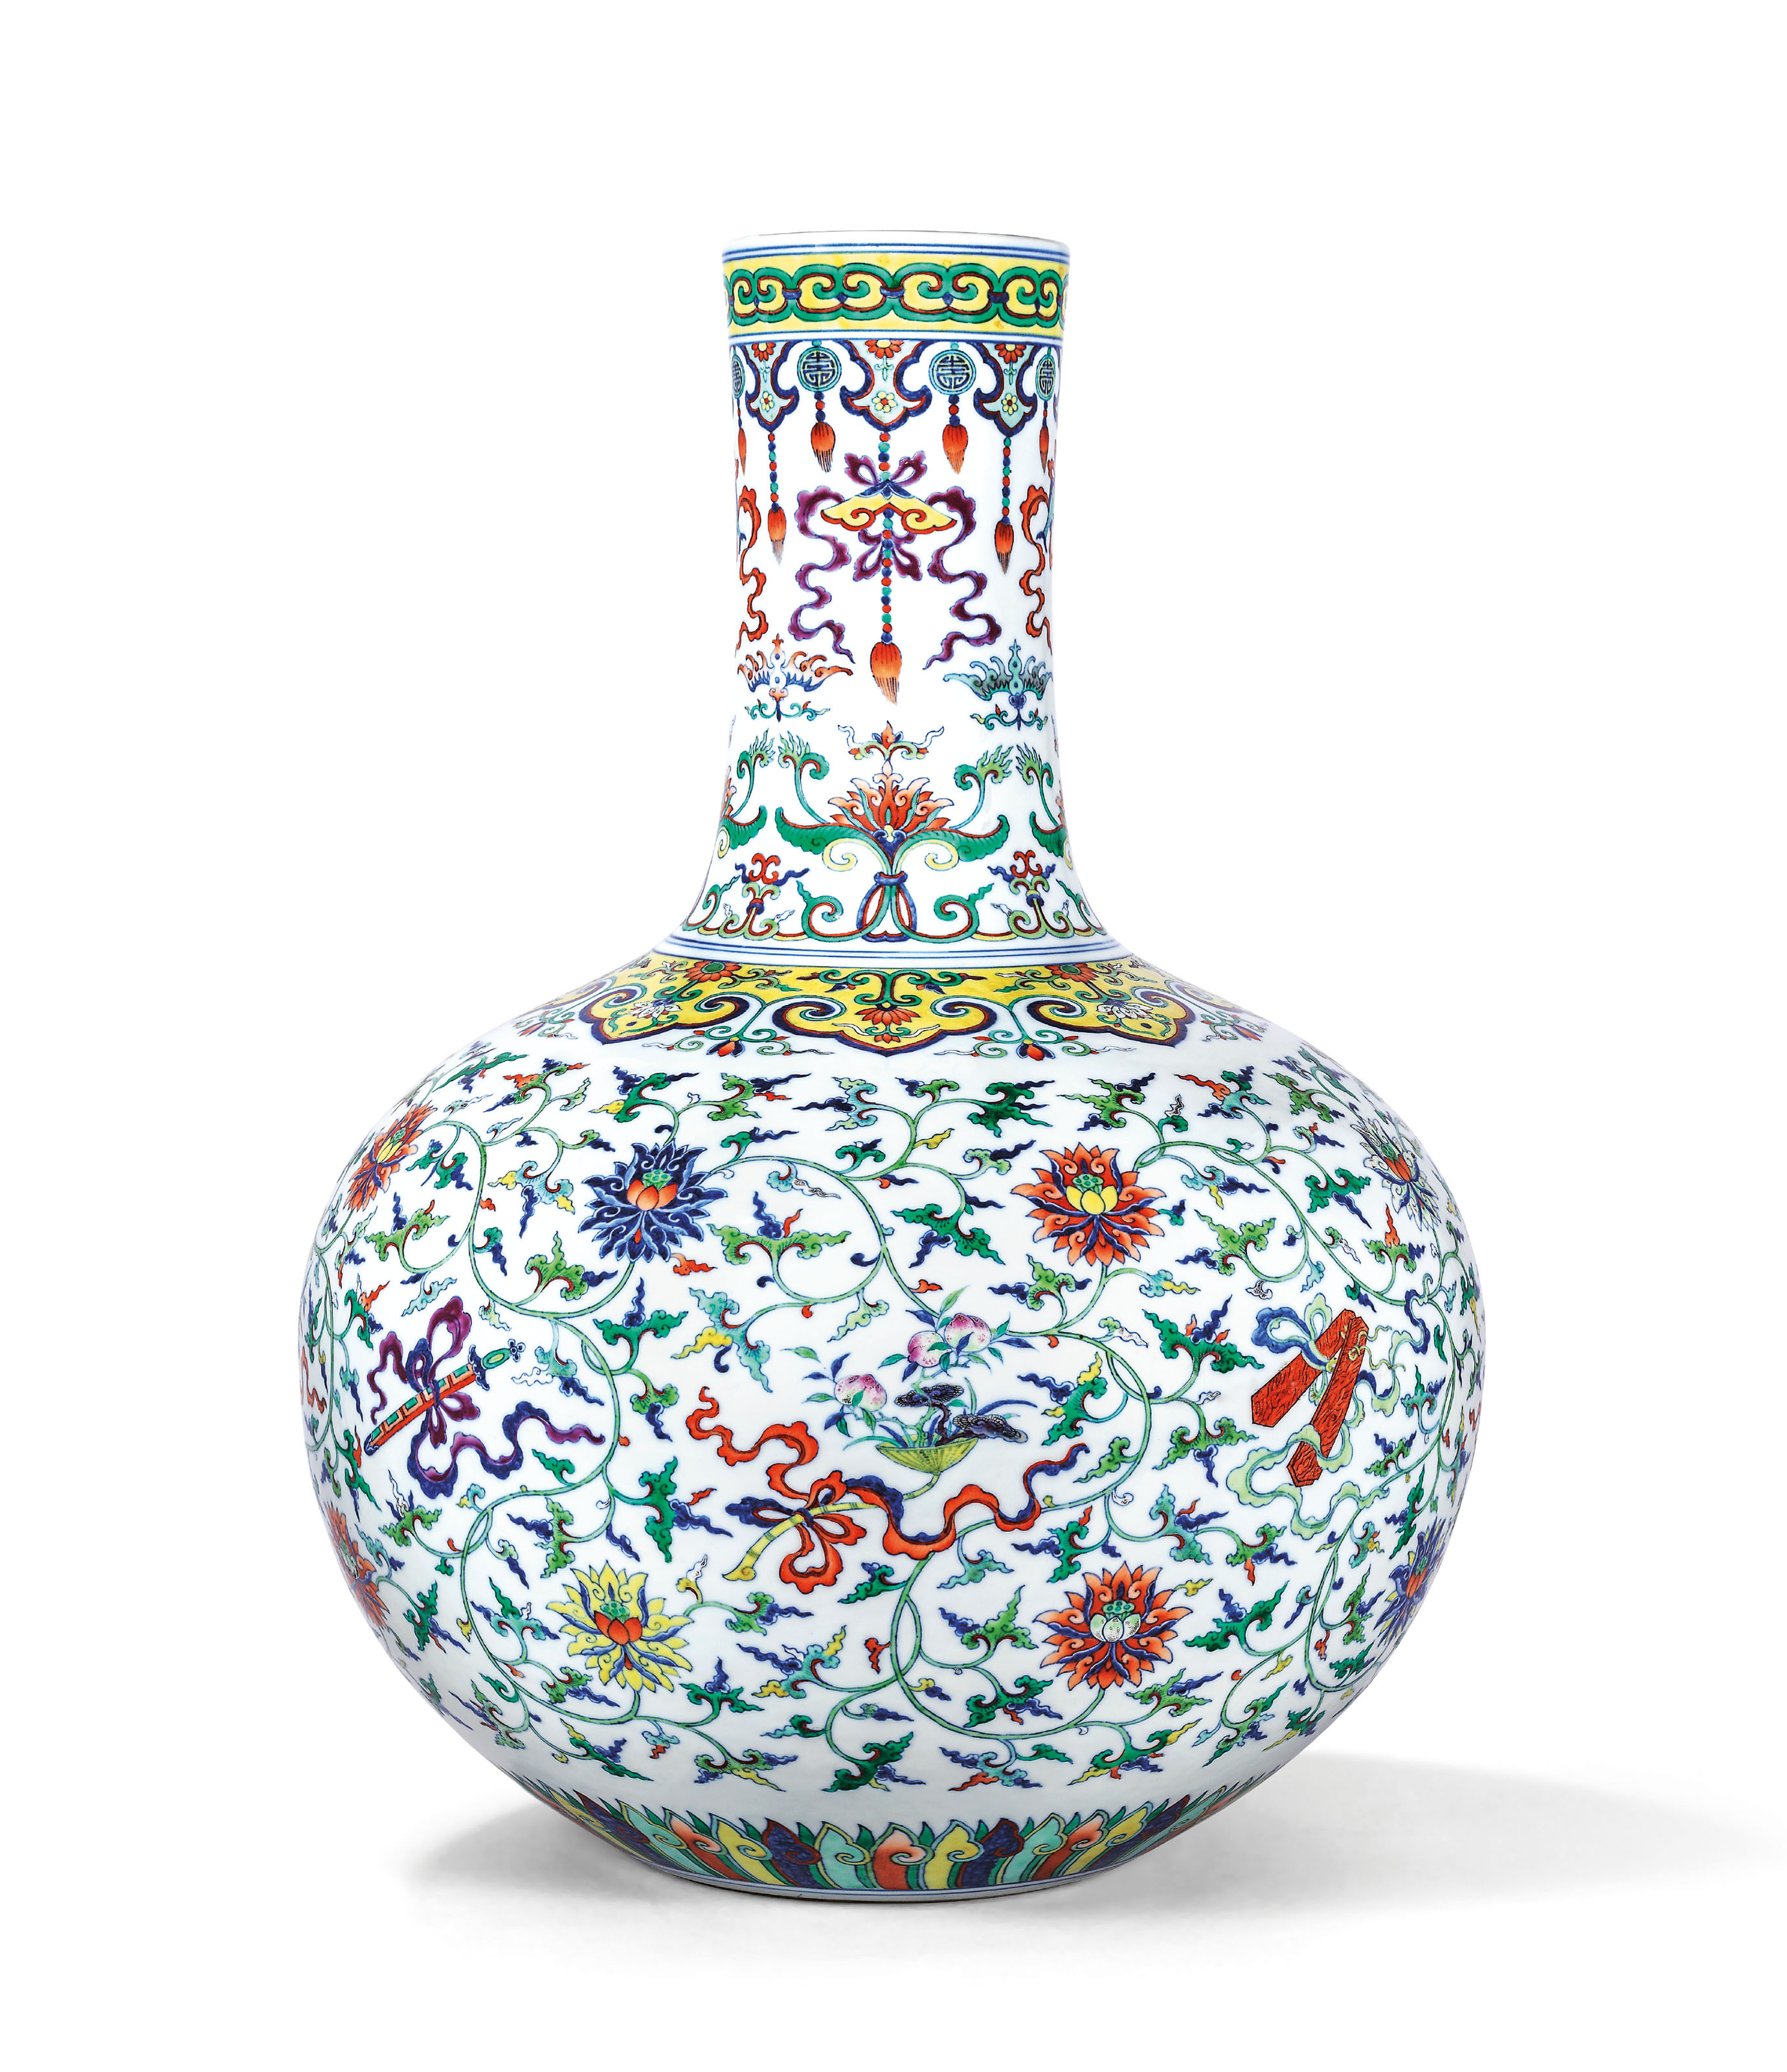 25 Awesome Waterford Marquis Sweet Memories Vase 2024 free download waterford marquis sweet memories vase of philbrook museum within this rare chinese vase languished in storage at an oklahoma museum for over a decade then it sold for 14 5 million